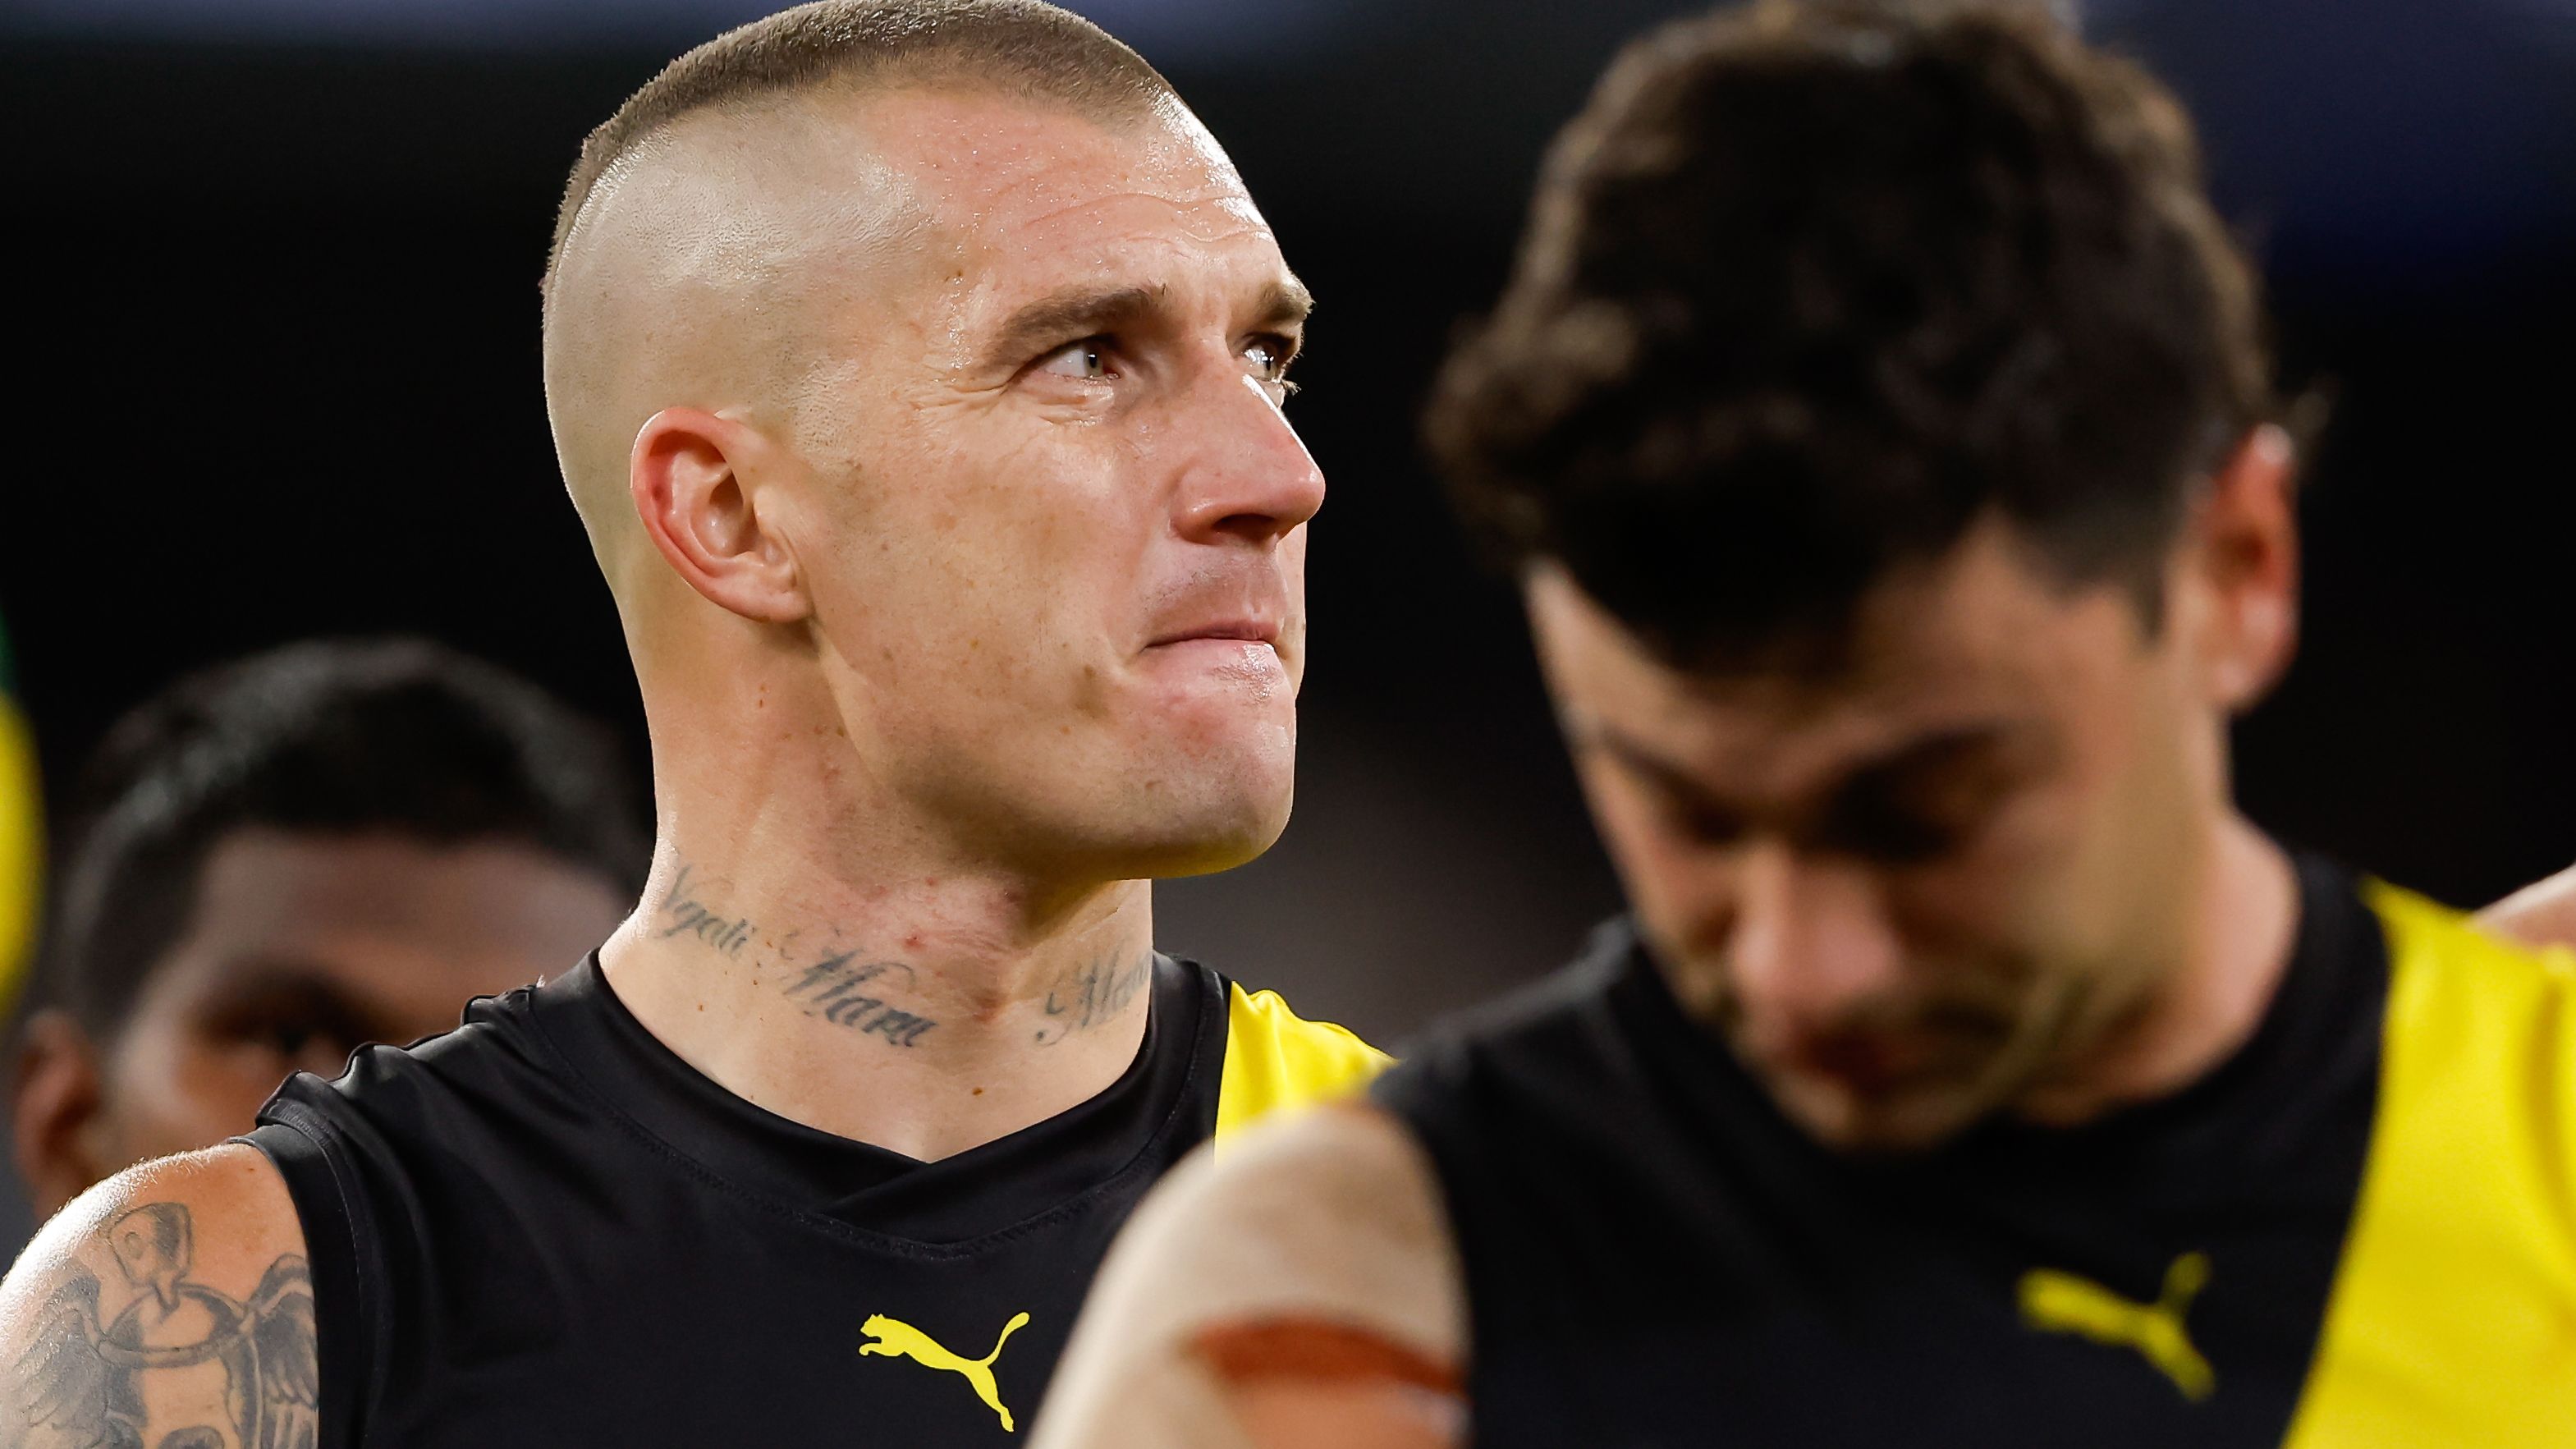 Manager hits out at 'shocking' Dustin Martin rumour after claims Tigers star is 'fed up'